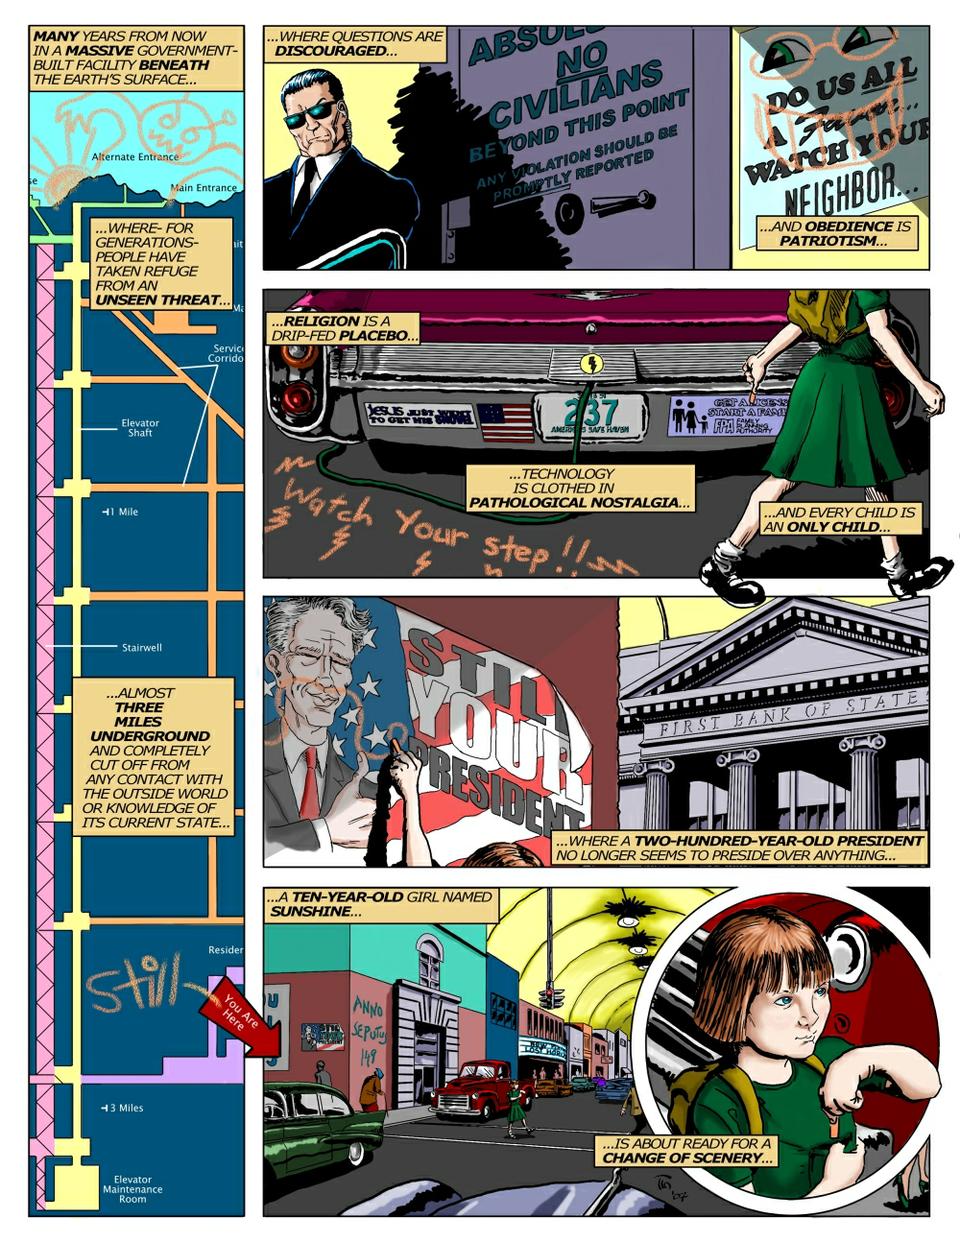 State 51 Sample Page